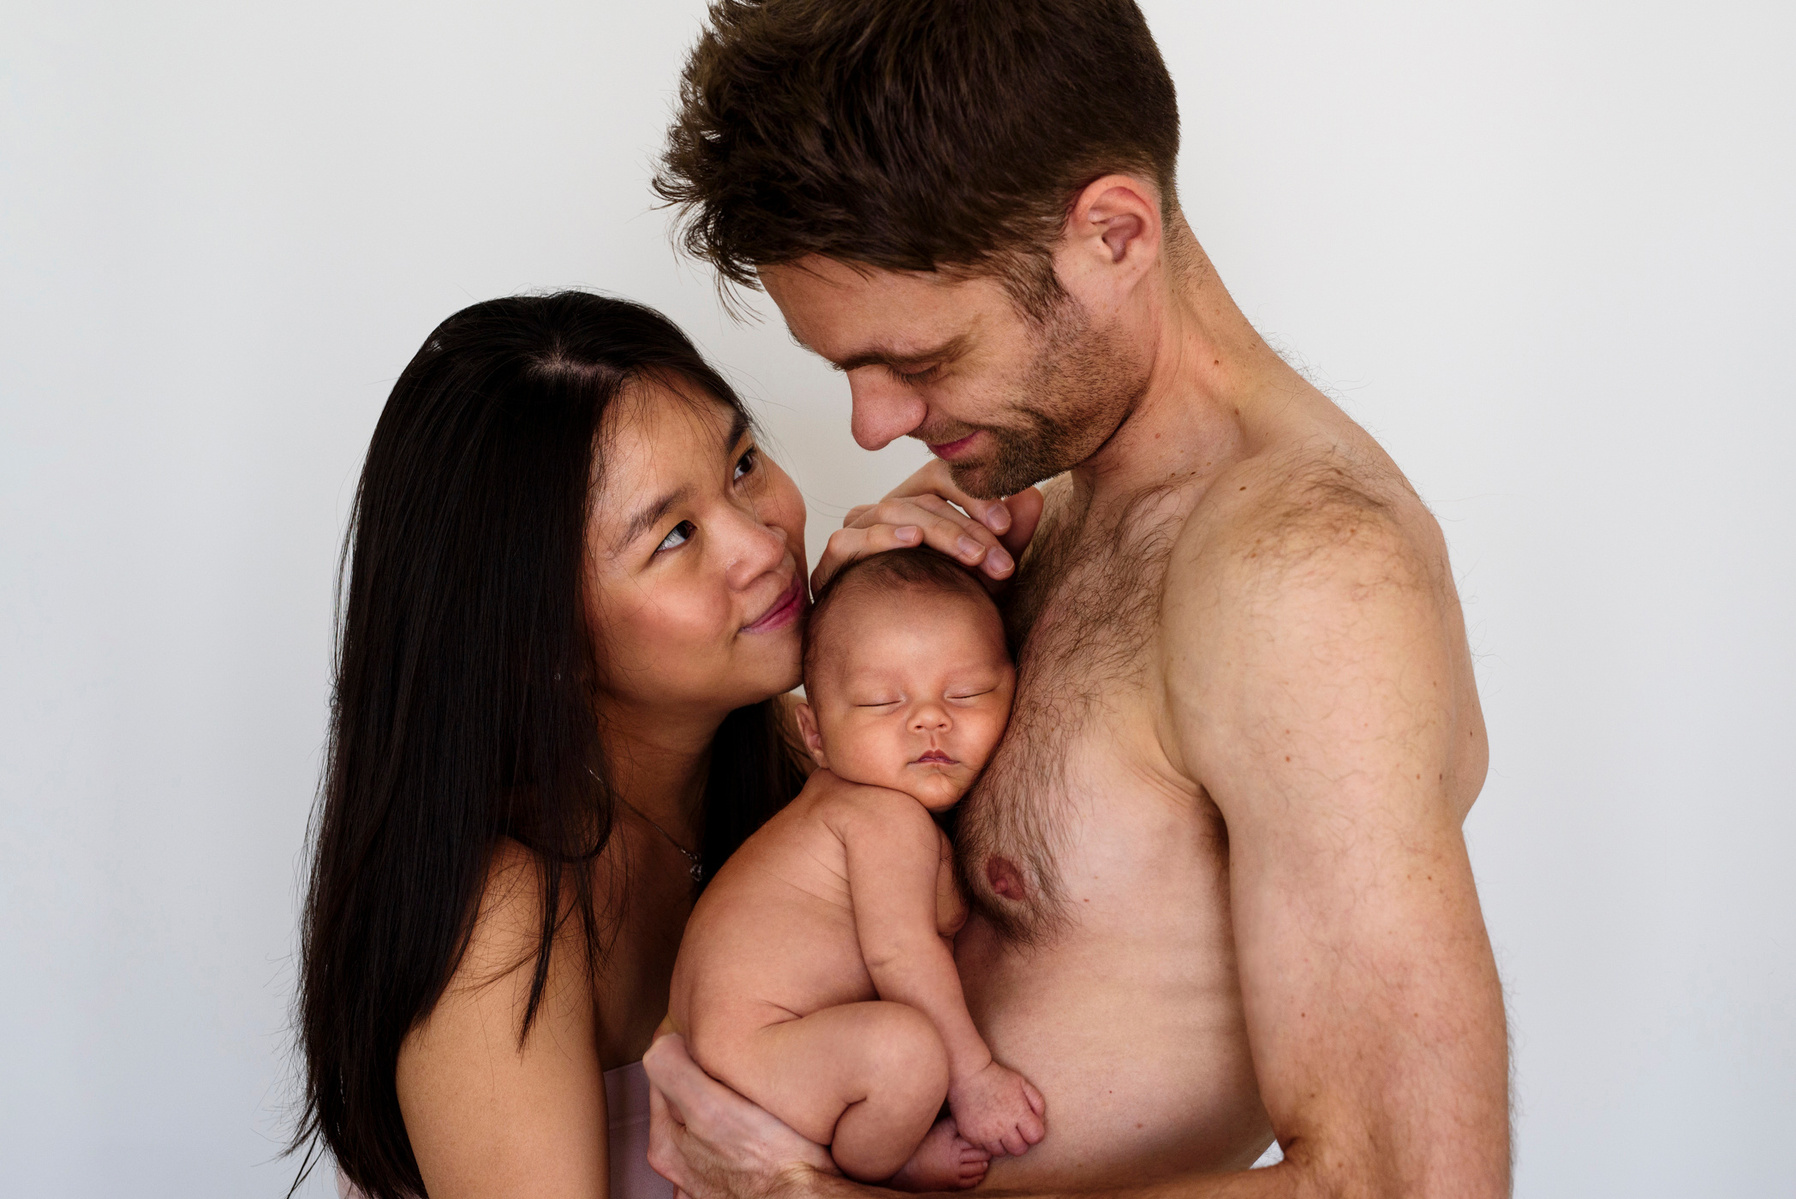 Loving parents look into each other's eyes whilst the father holds his newborn son close to his bare chest for their first professional portrait as a family. Photographed by Geneva's leading portrait photographer, Helen Putsman, based in Chêne-Bougeries.